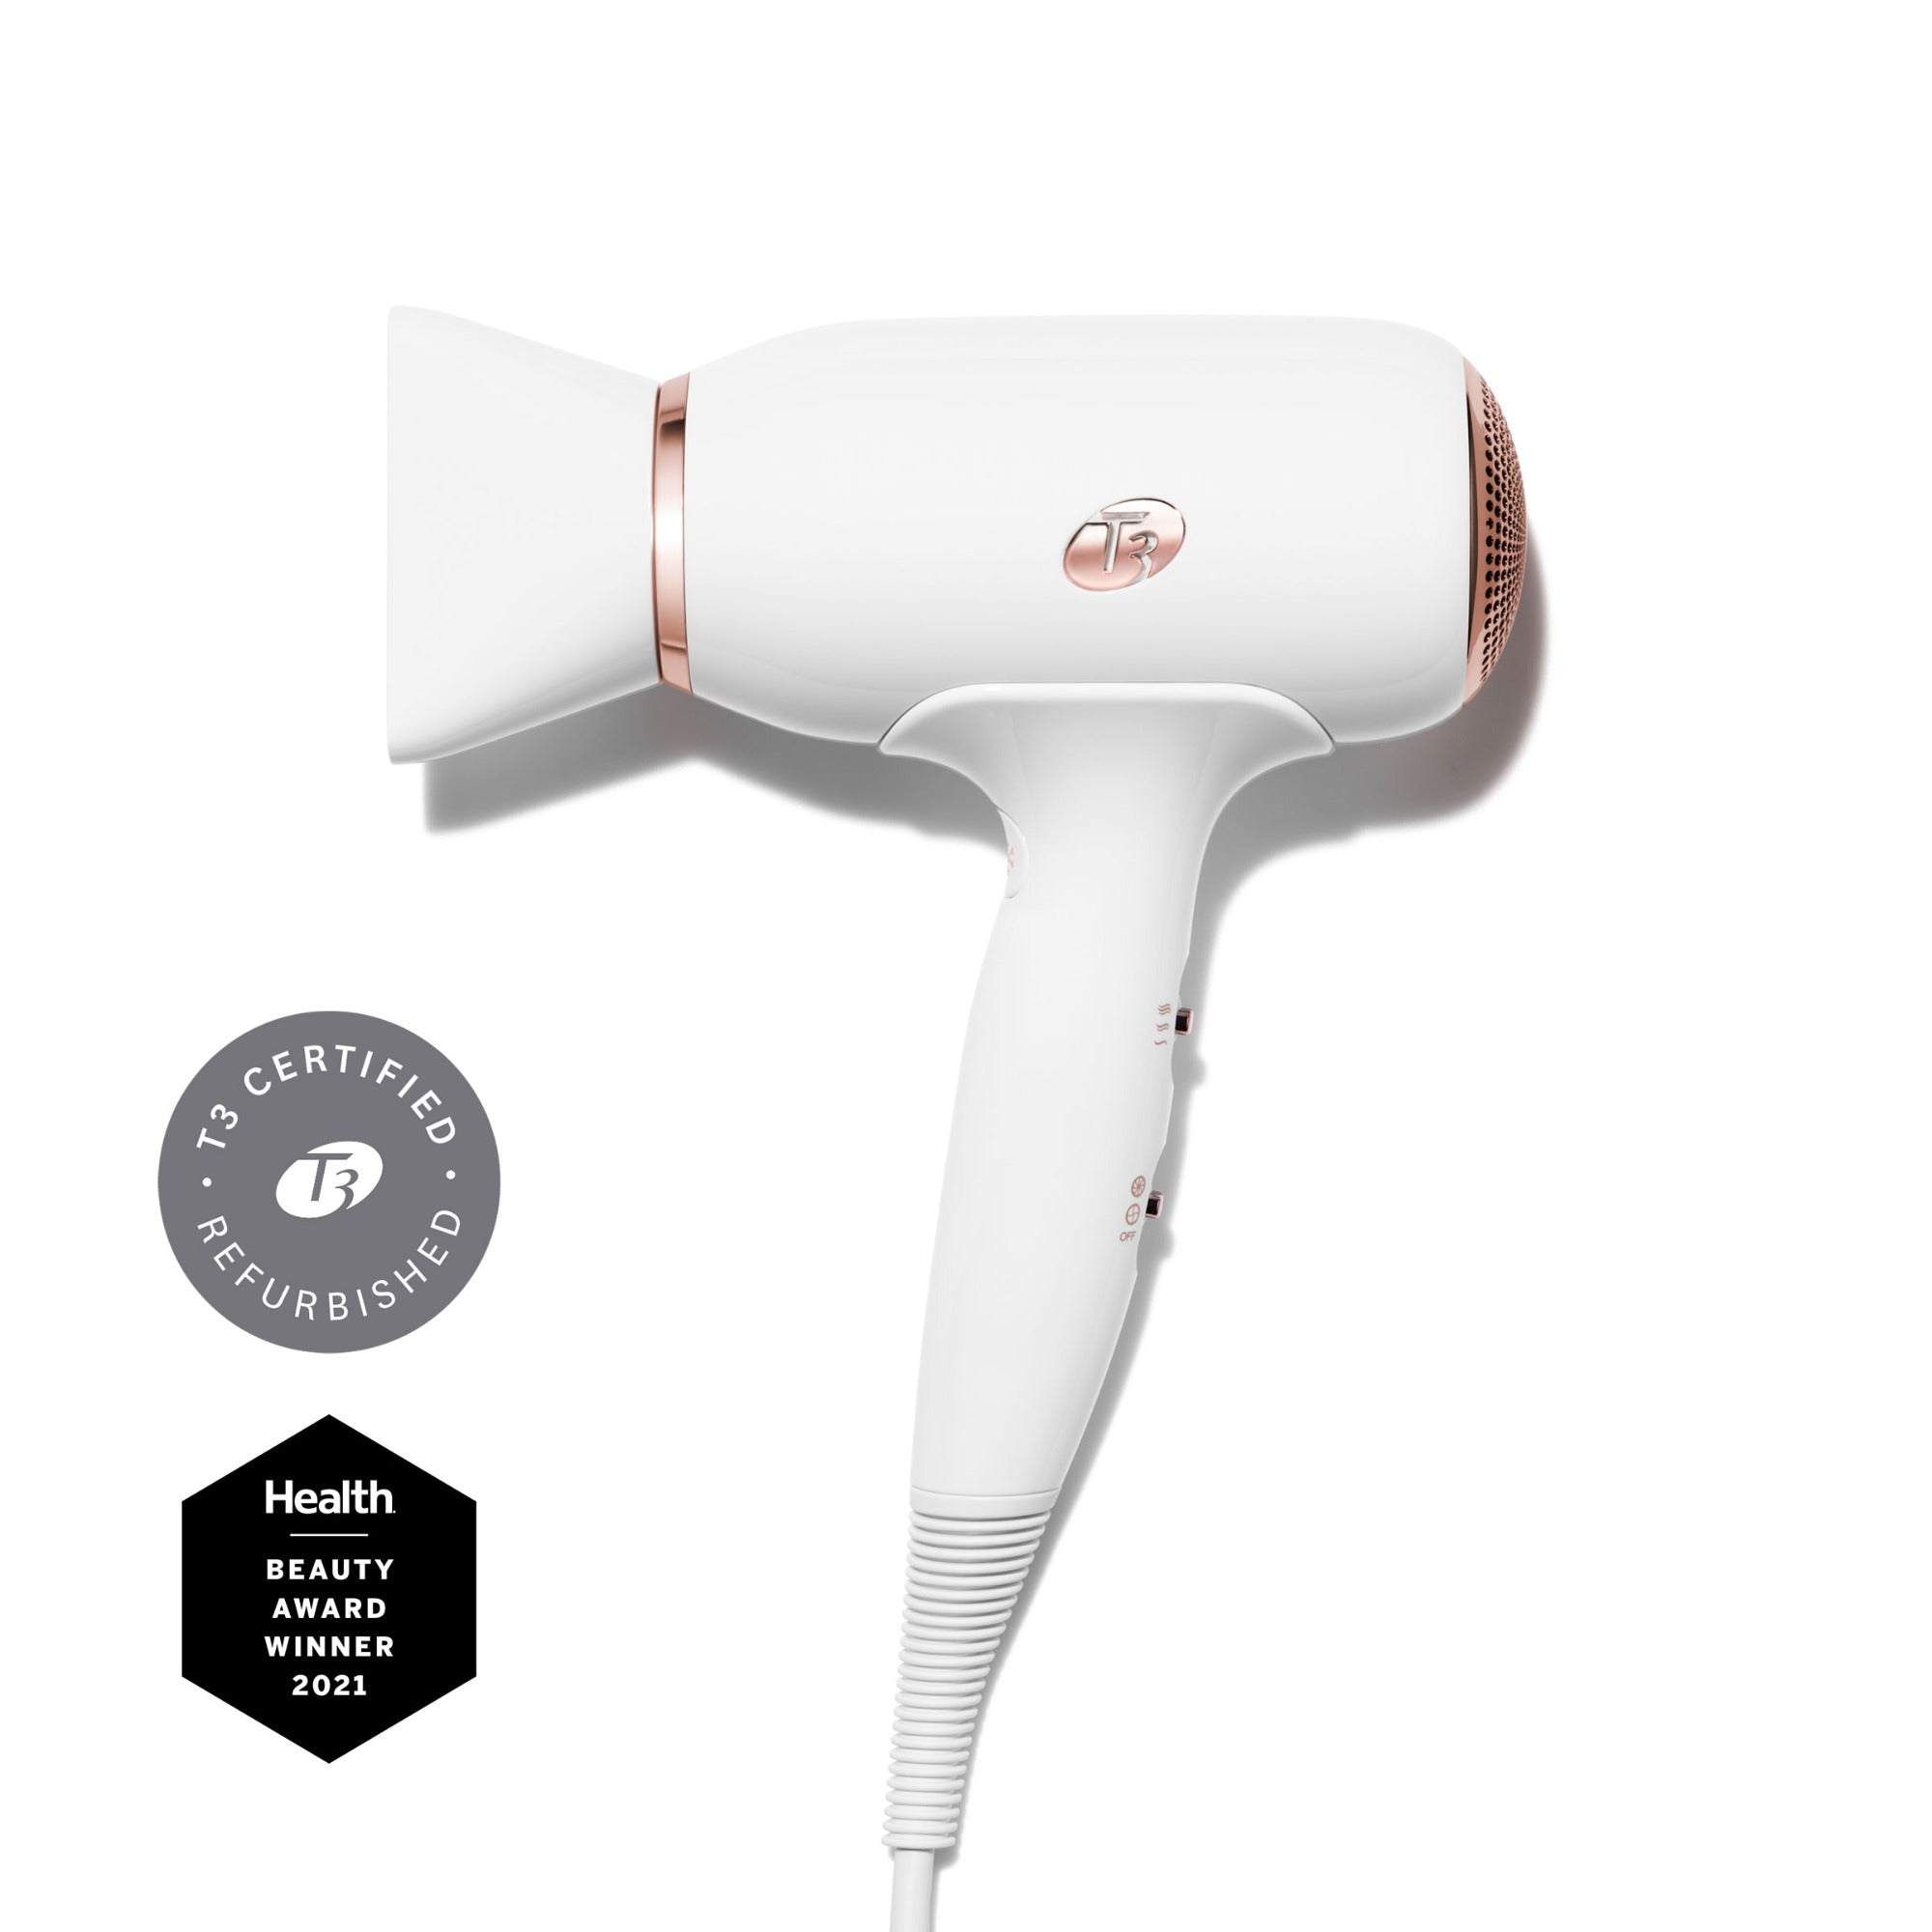 T3 Fit compact hair dryer - available refurbished